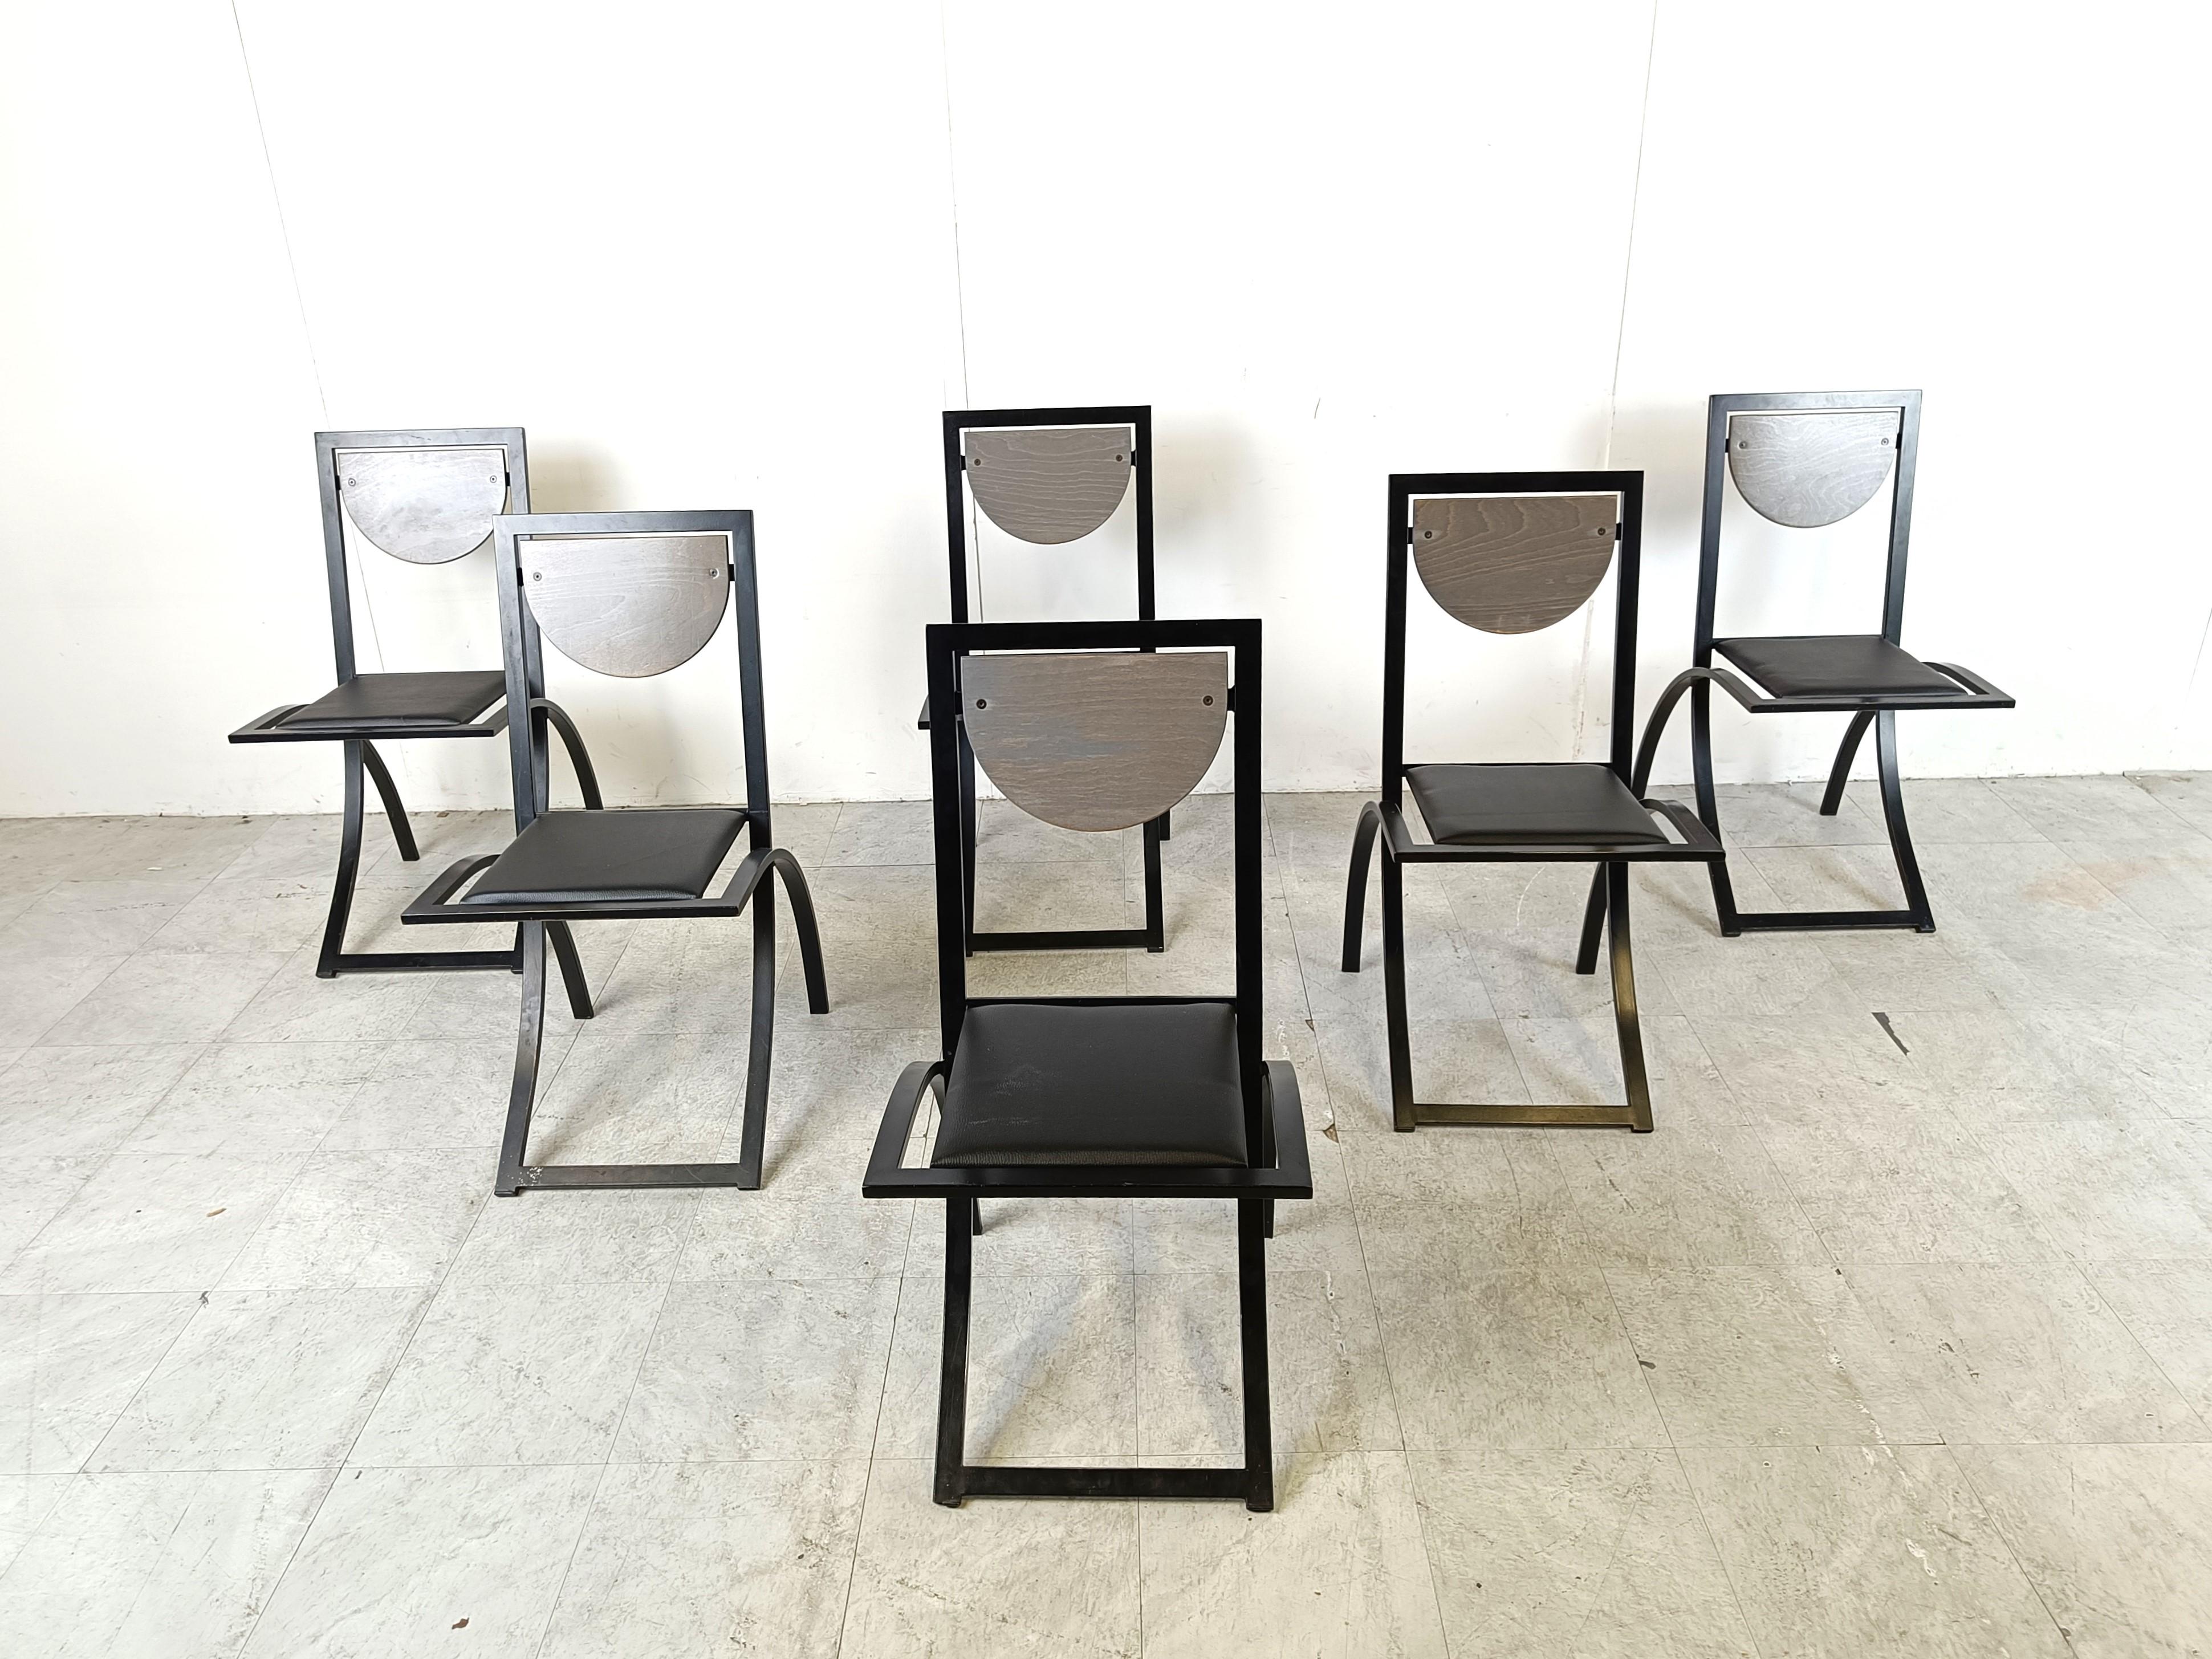 Vintage 'Sinus' dining chairs by Karl Friedrich Förster for Kff for KFF Germany with a metal frame and a leatherette upholstery and a wooden back panel.

Timeless design, very good condition

1990s - Germany

Dimensions:
Height: 88cm/34.64